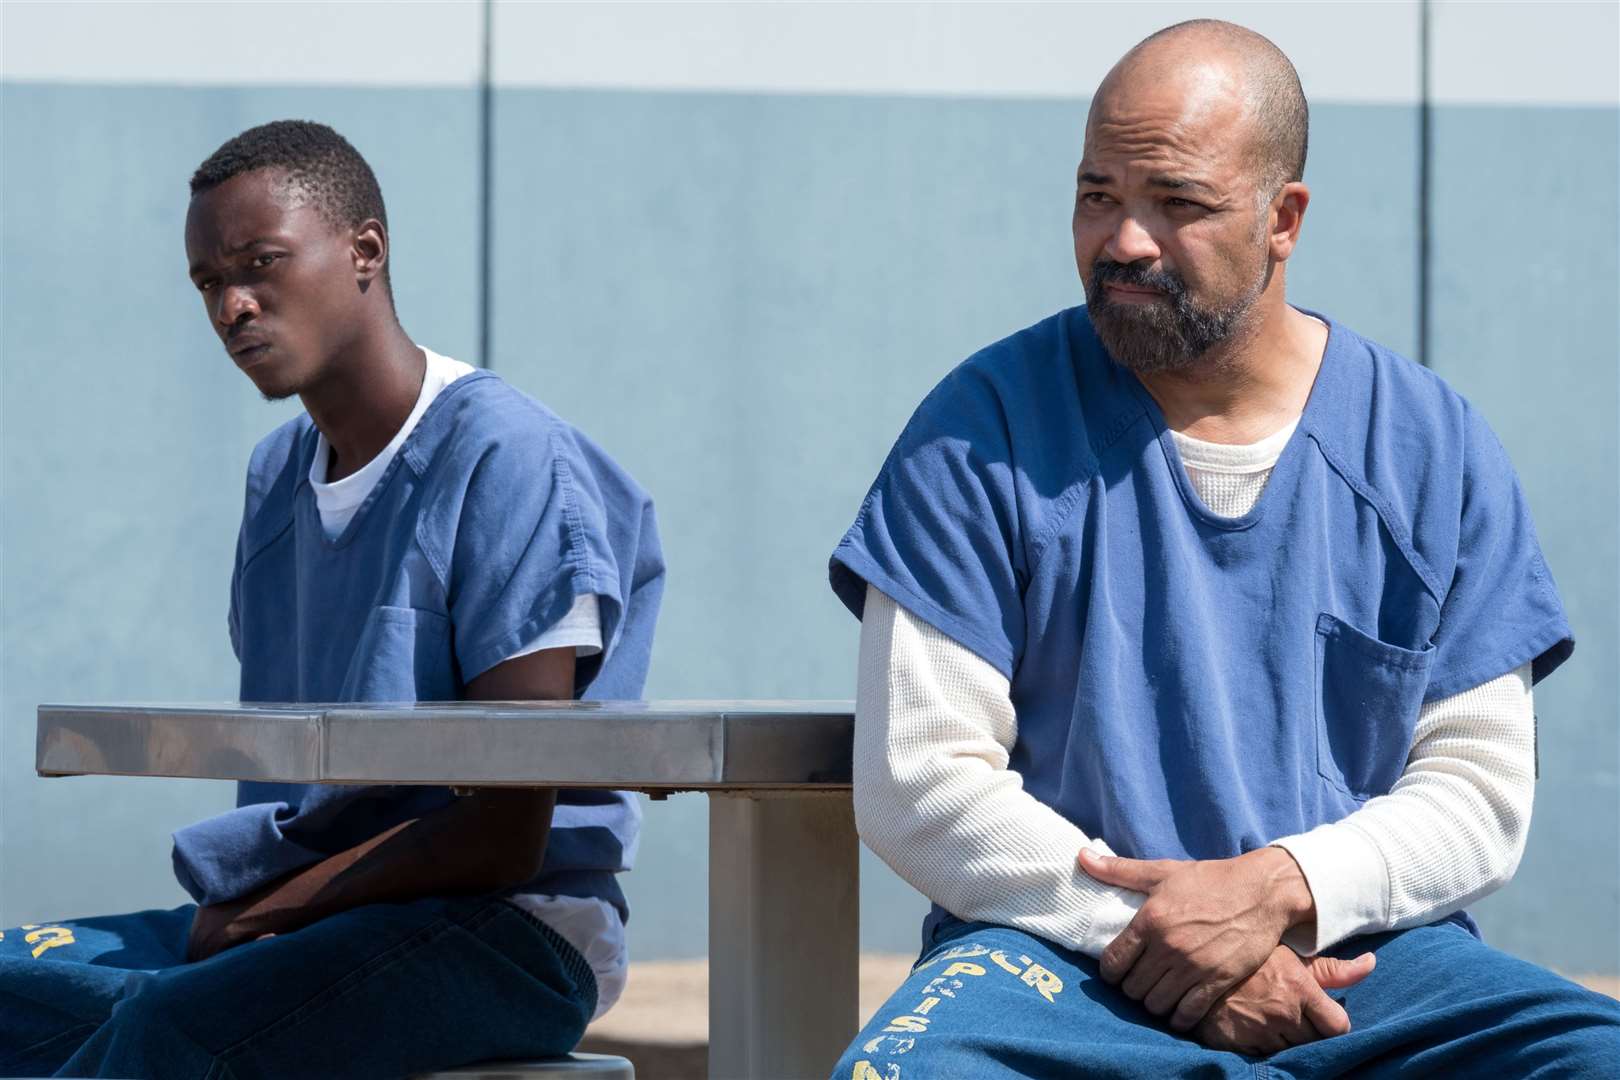 All Day And A Night. Pictured: Ashton Sanders as Jahkor and Jeffrey Wright as JD Picture: PA Photo/Netflix/Matt Kennedy